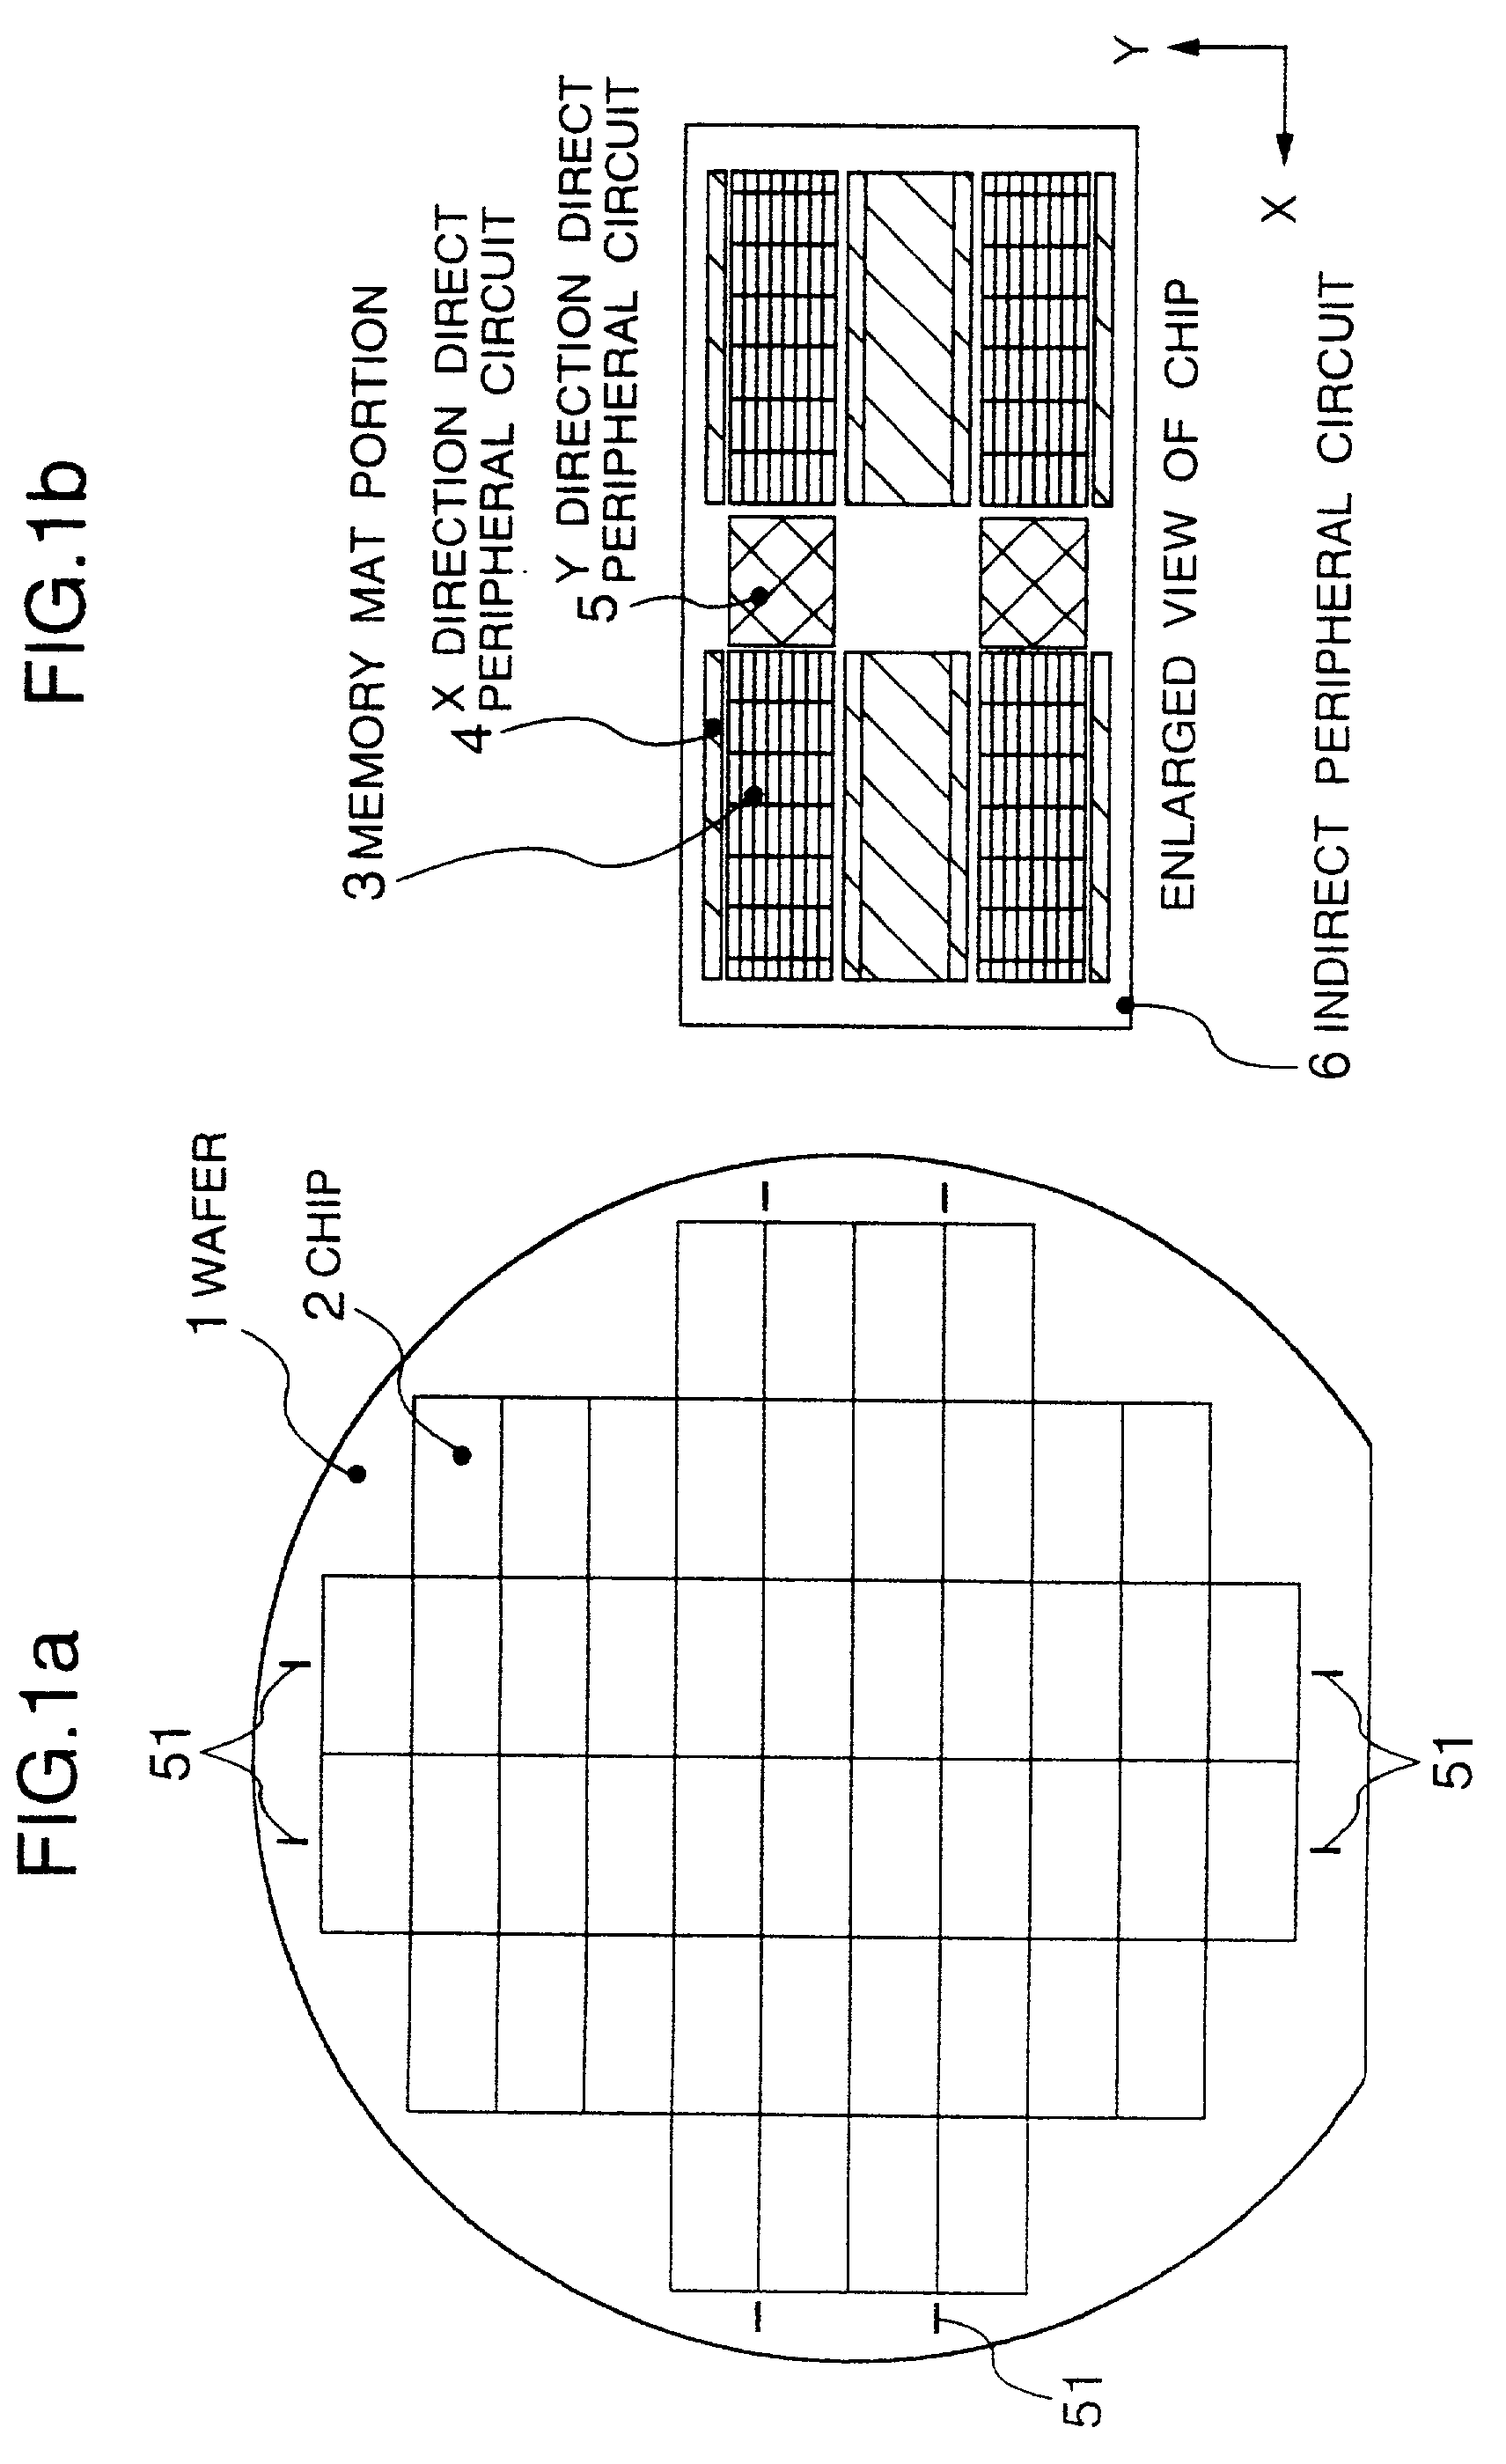 Method and system for inspecting a pattern